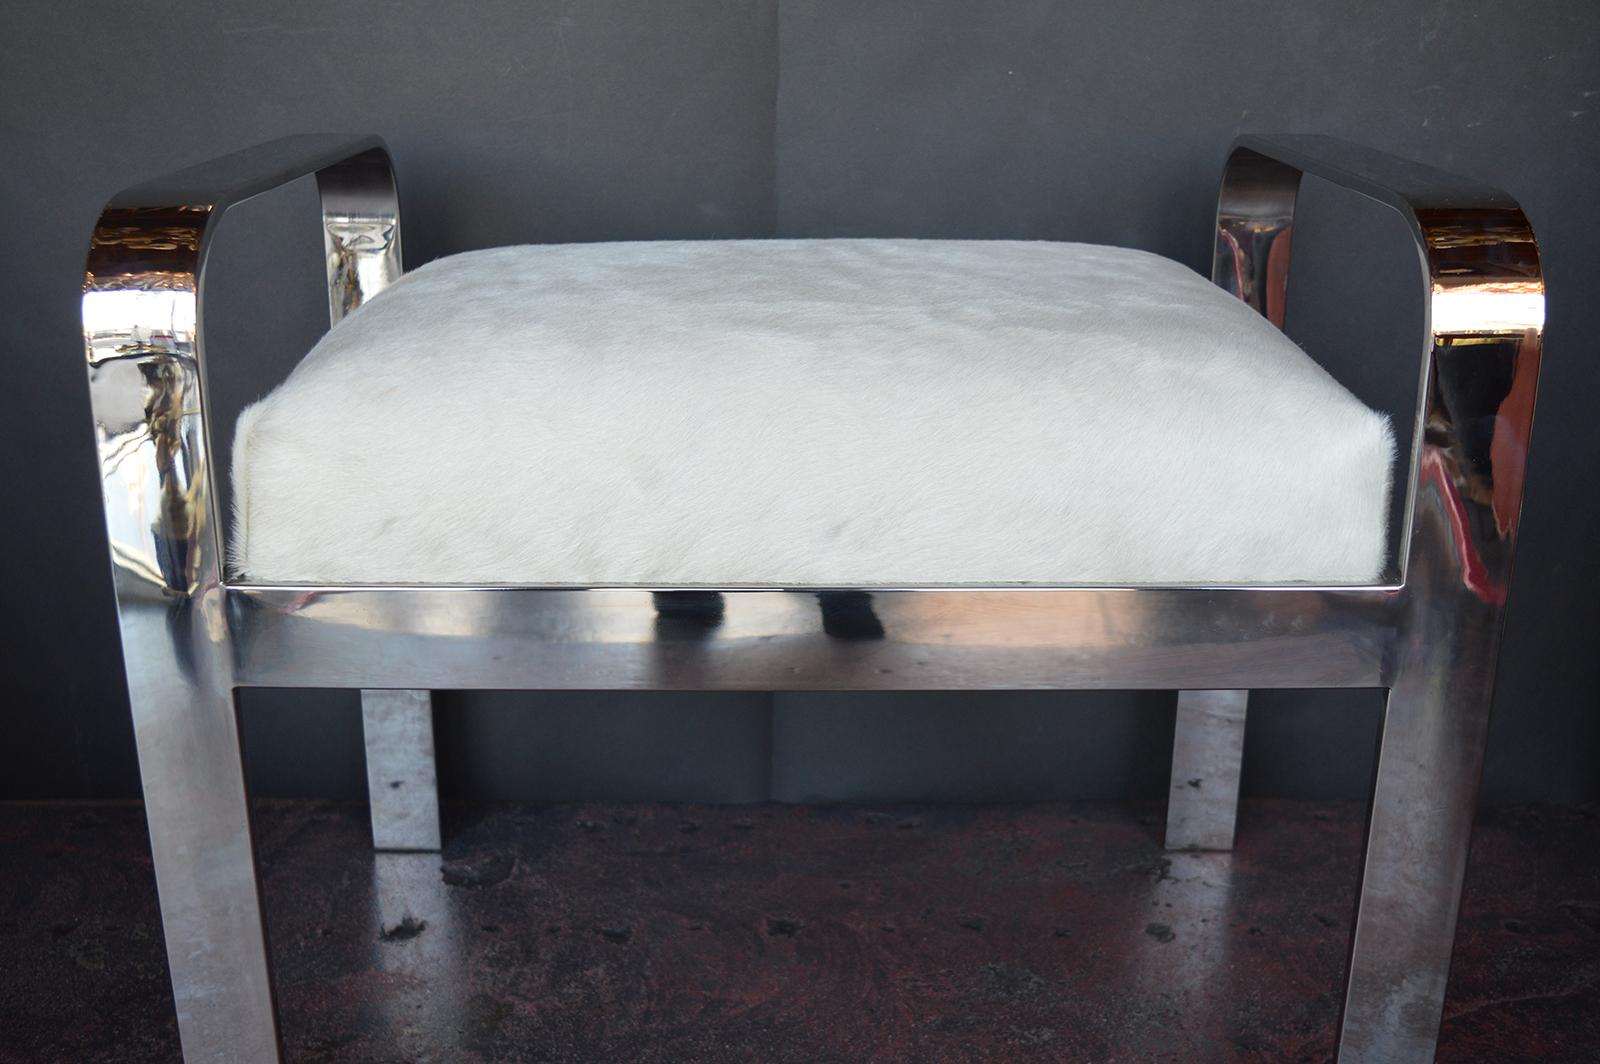 Steel nickel plated stool with white cow hide seat.